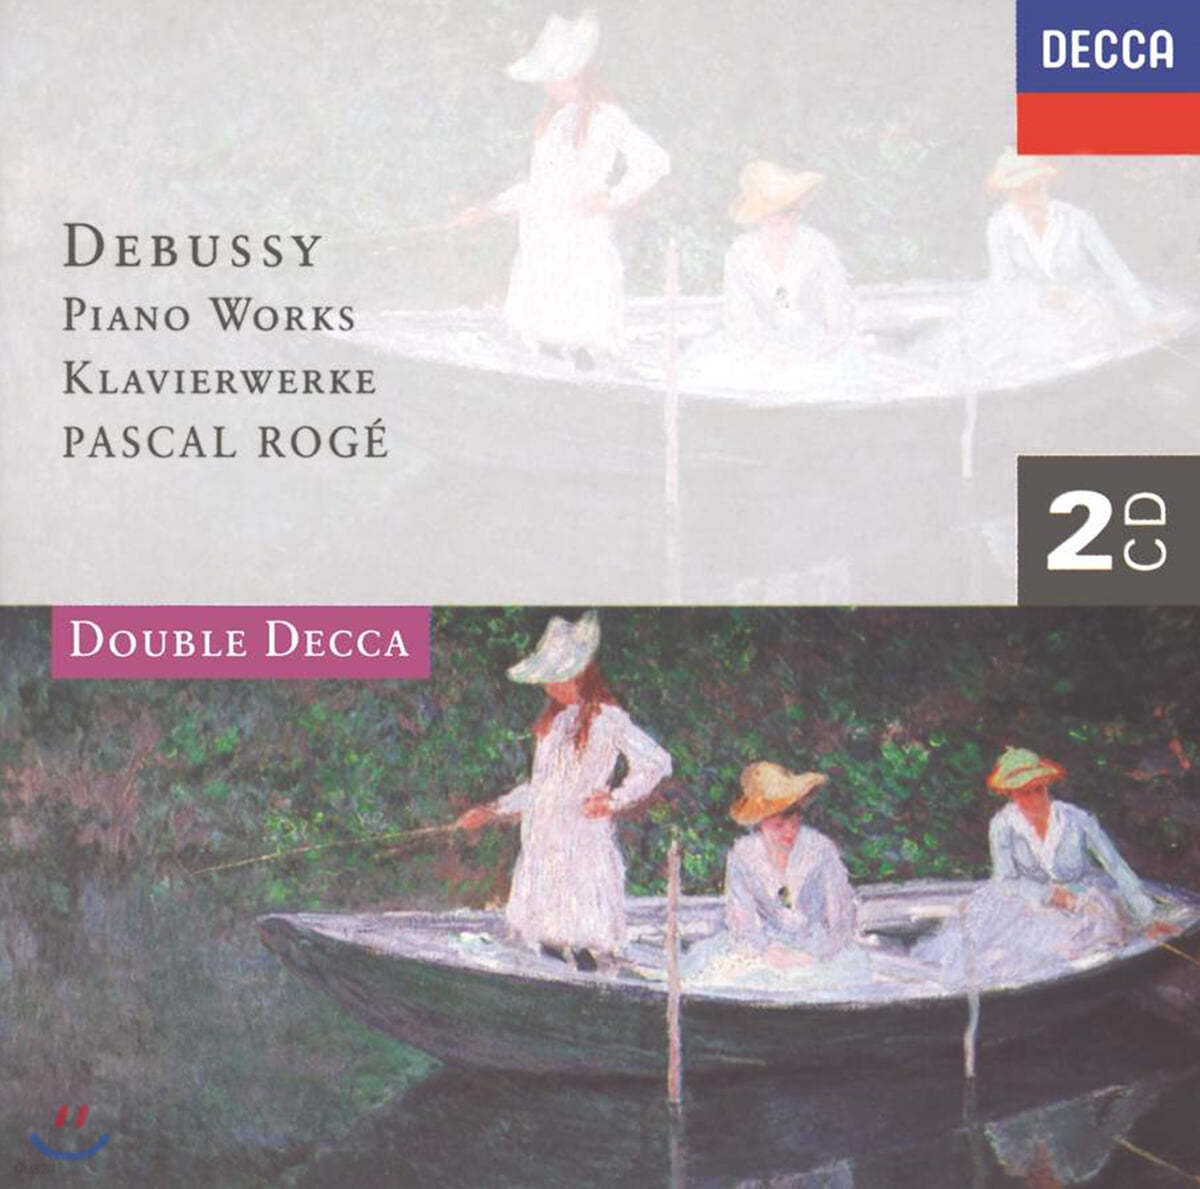 Pascal Roge 드뷔시: 피아노 작품집 (Debussy: Suite Bergamasque)